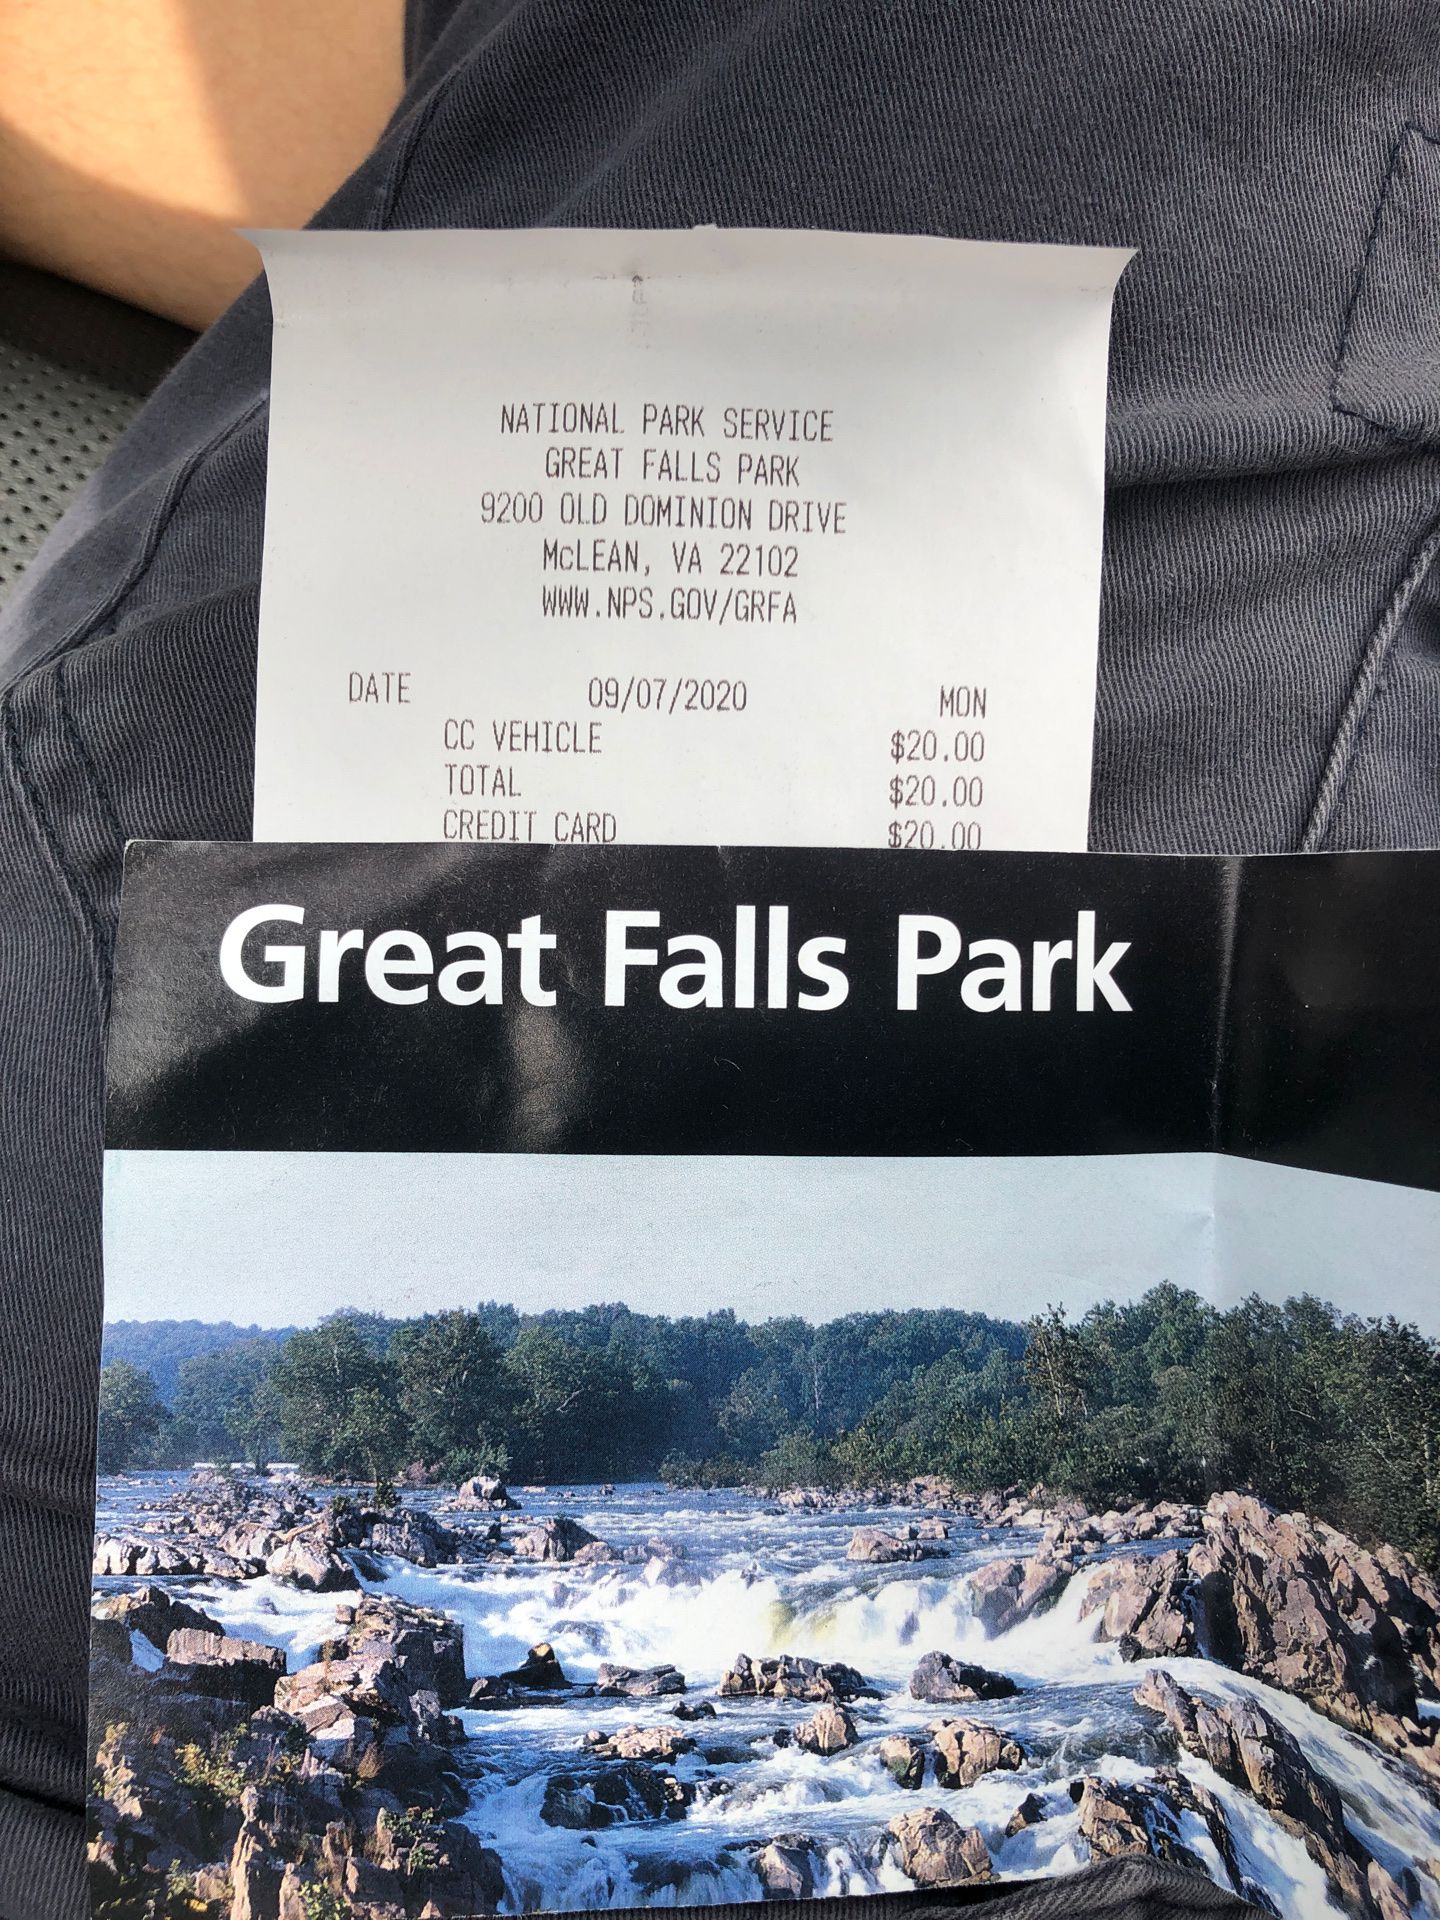 Great falls park ticket 9/7-9/13 unlimited entry